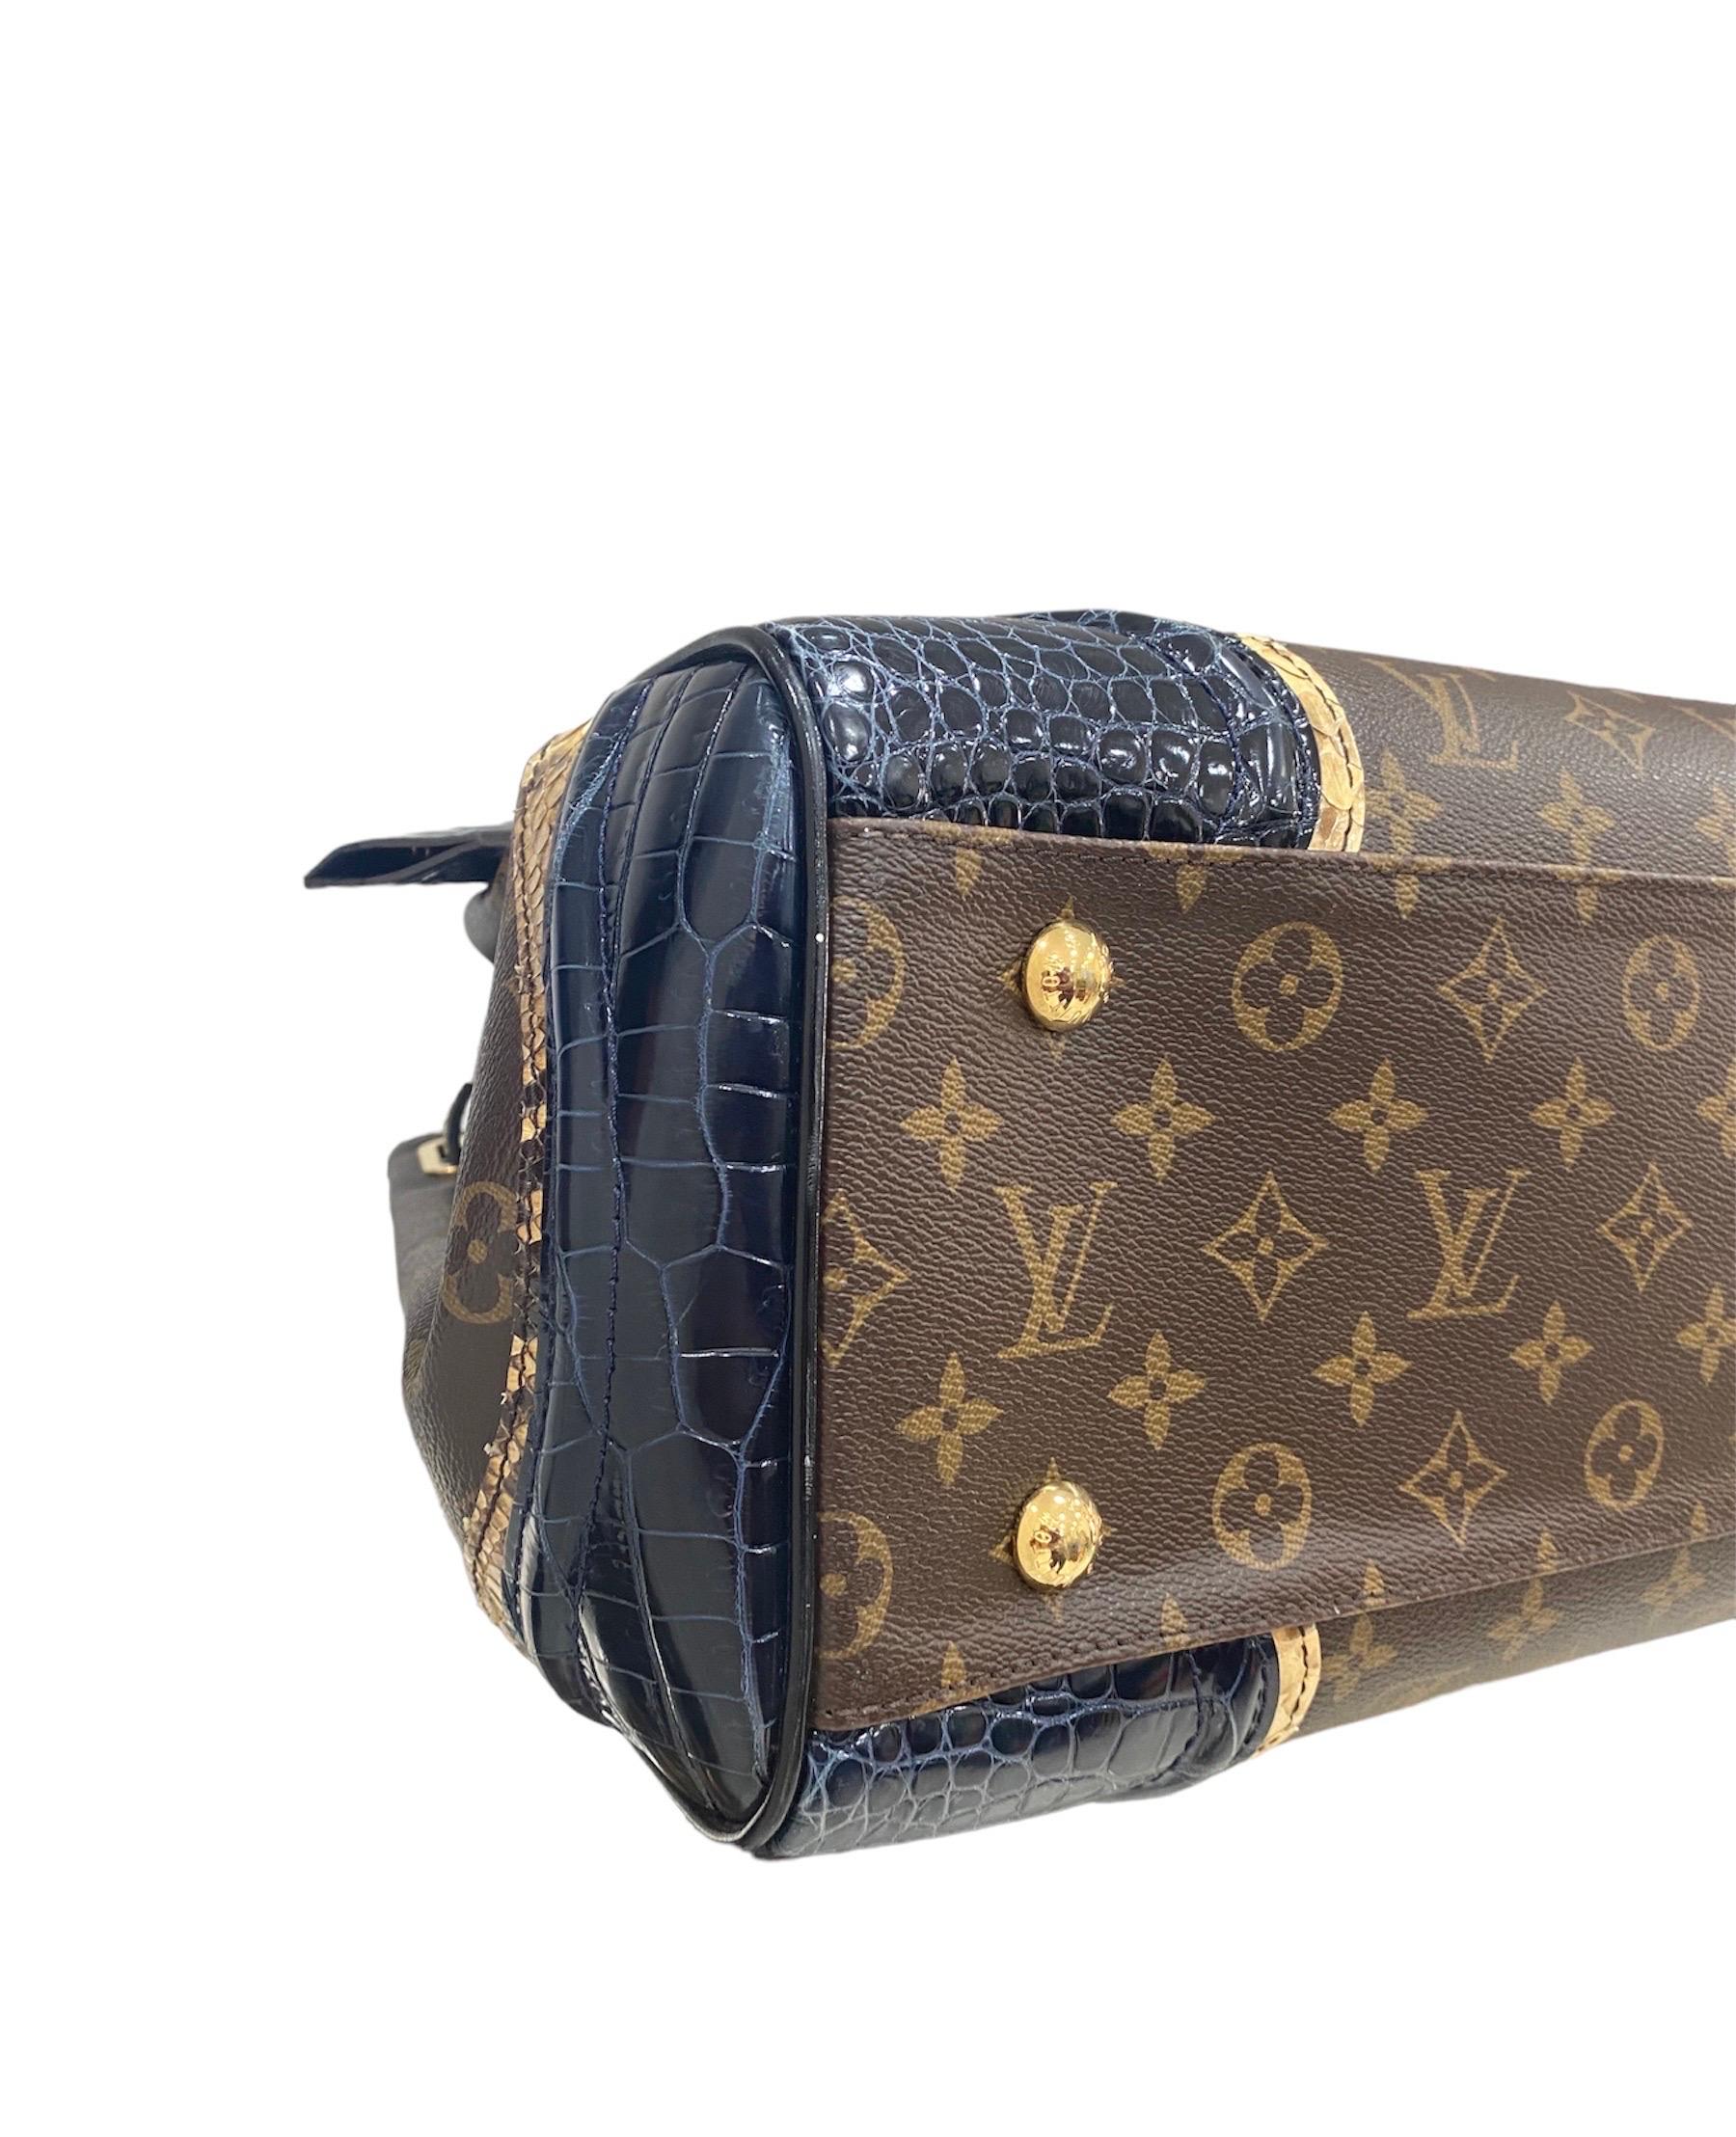 2011 Louis Vuitton Monogramissime Alligar & Piton Top Handle Bag In Excellent Condition For Sale In Torre Del Greco, IT